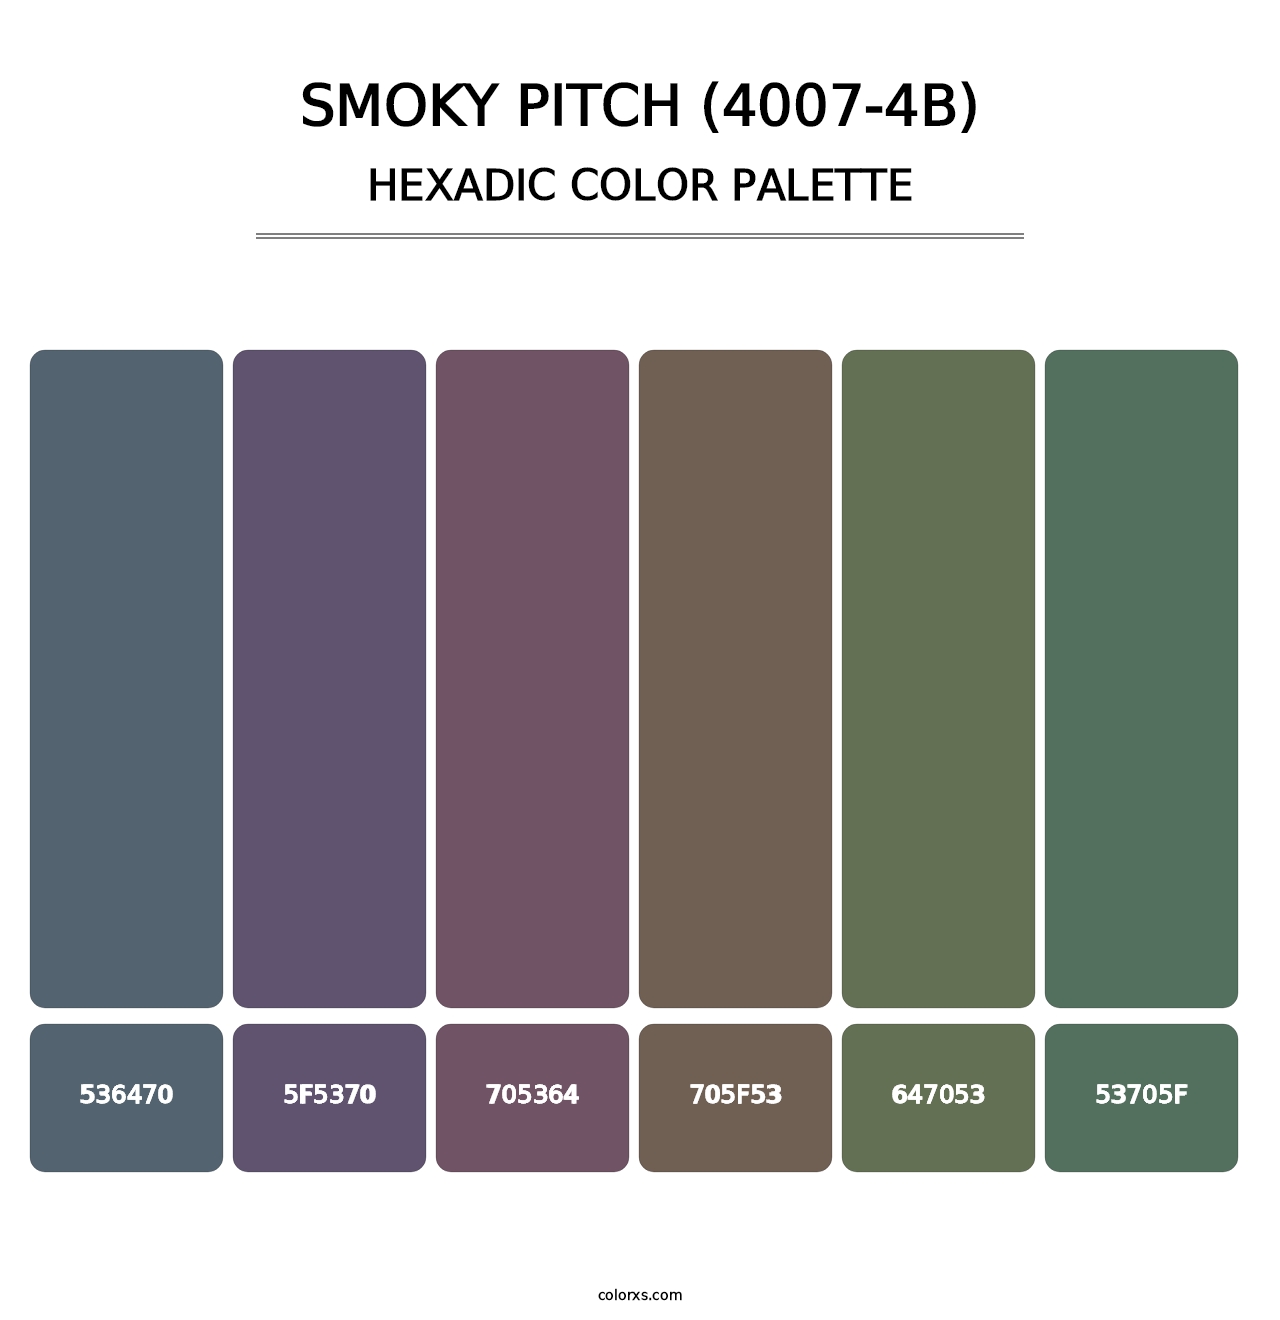 Smoky Pitch (4007-4B) - Hexadic Color Palette